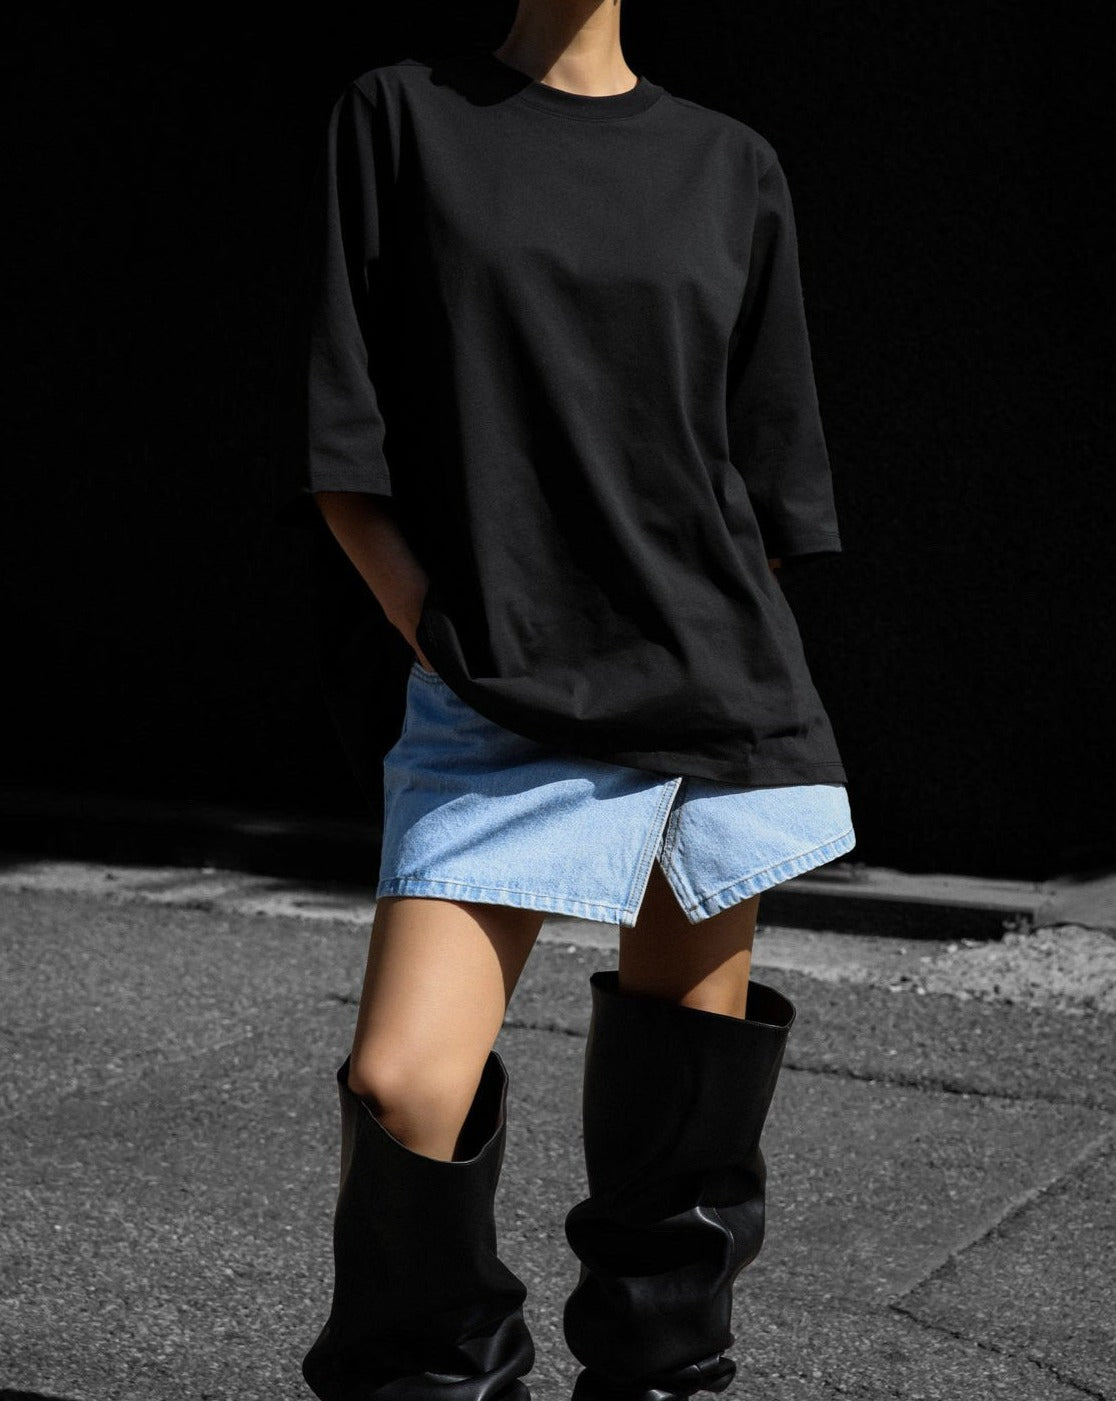 【PAPERMOON 페이퍼 문】SS / Washed Blue Denim Zipped Up Wrap Mini Skirt